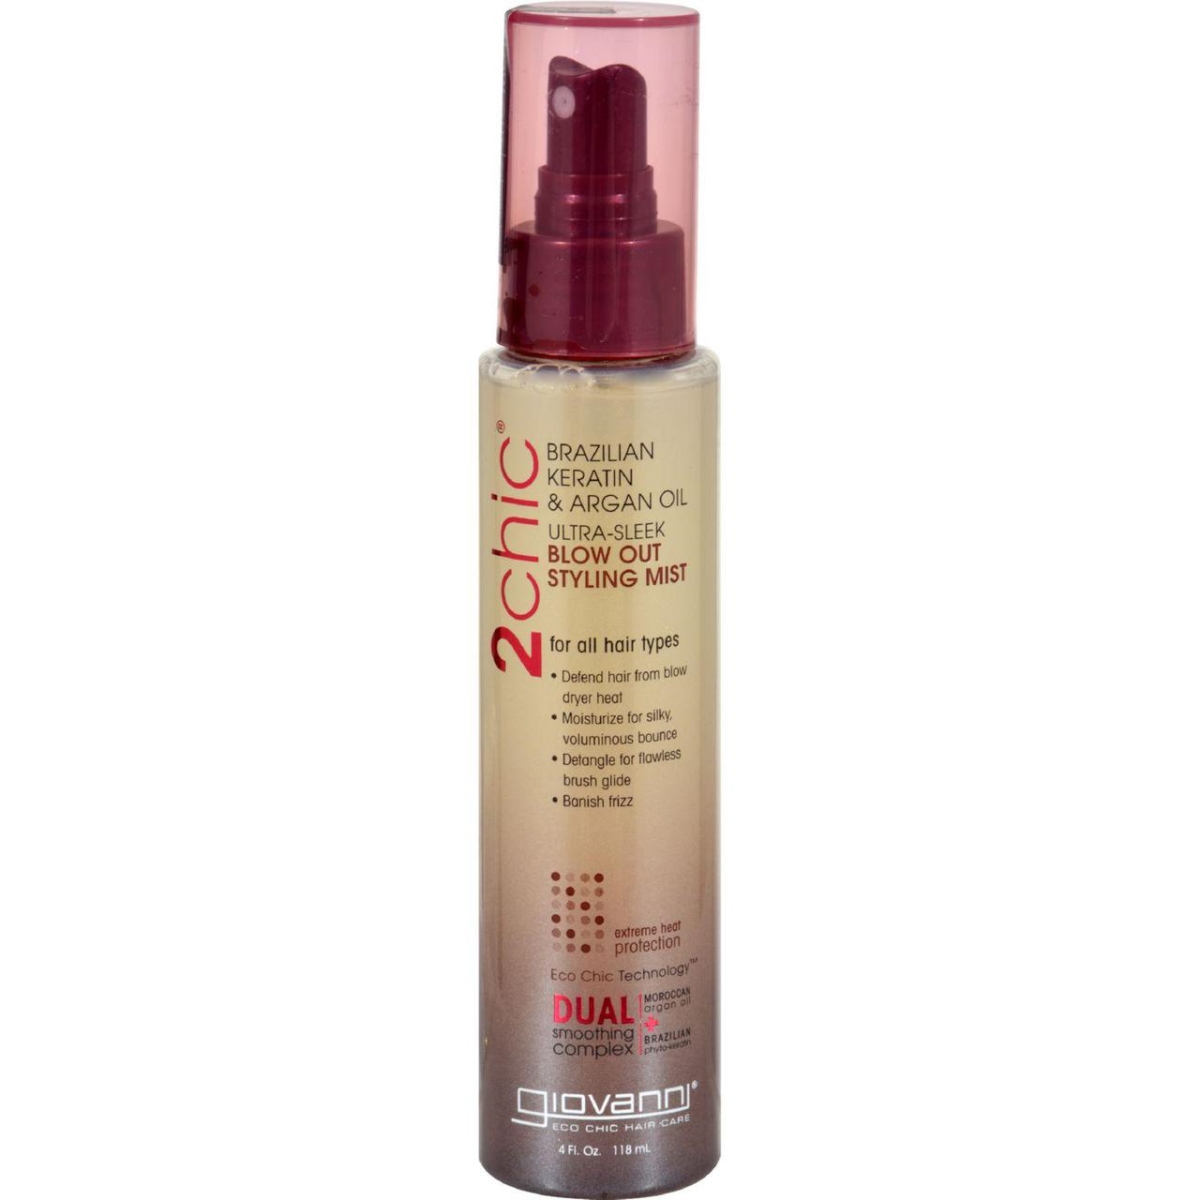 Hg1084565 4 Fl Oz 2chic Blow Out Styling Mist With Brazilian Keratin & Argan Oil